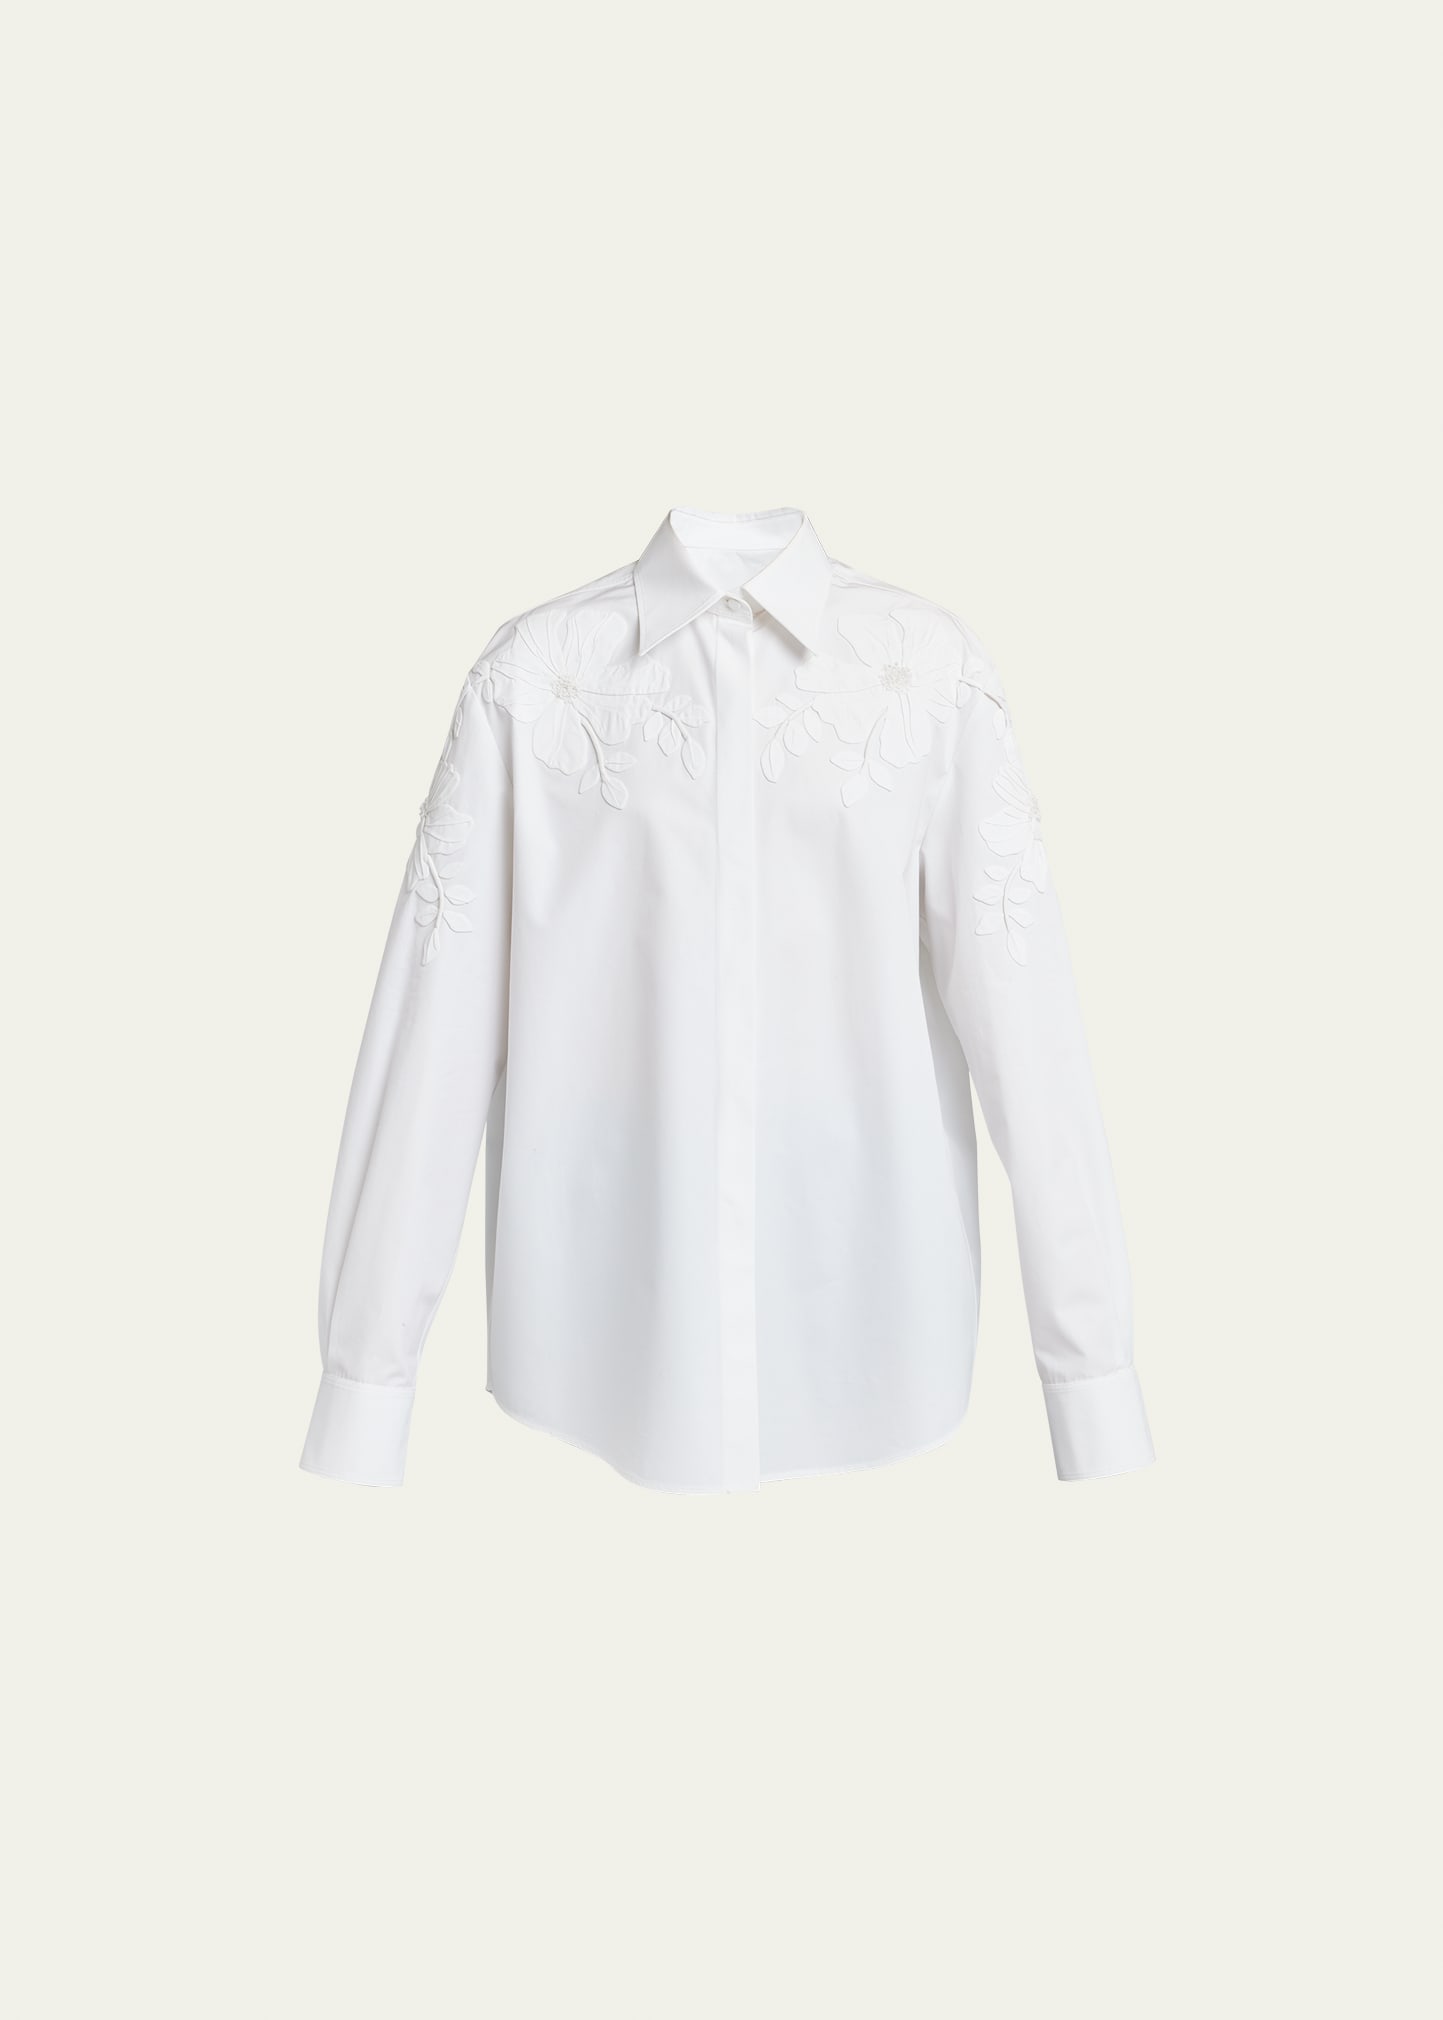 Valentino Floral Tonal Embroidered Poplin Collared Blouse In White